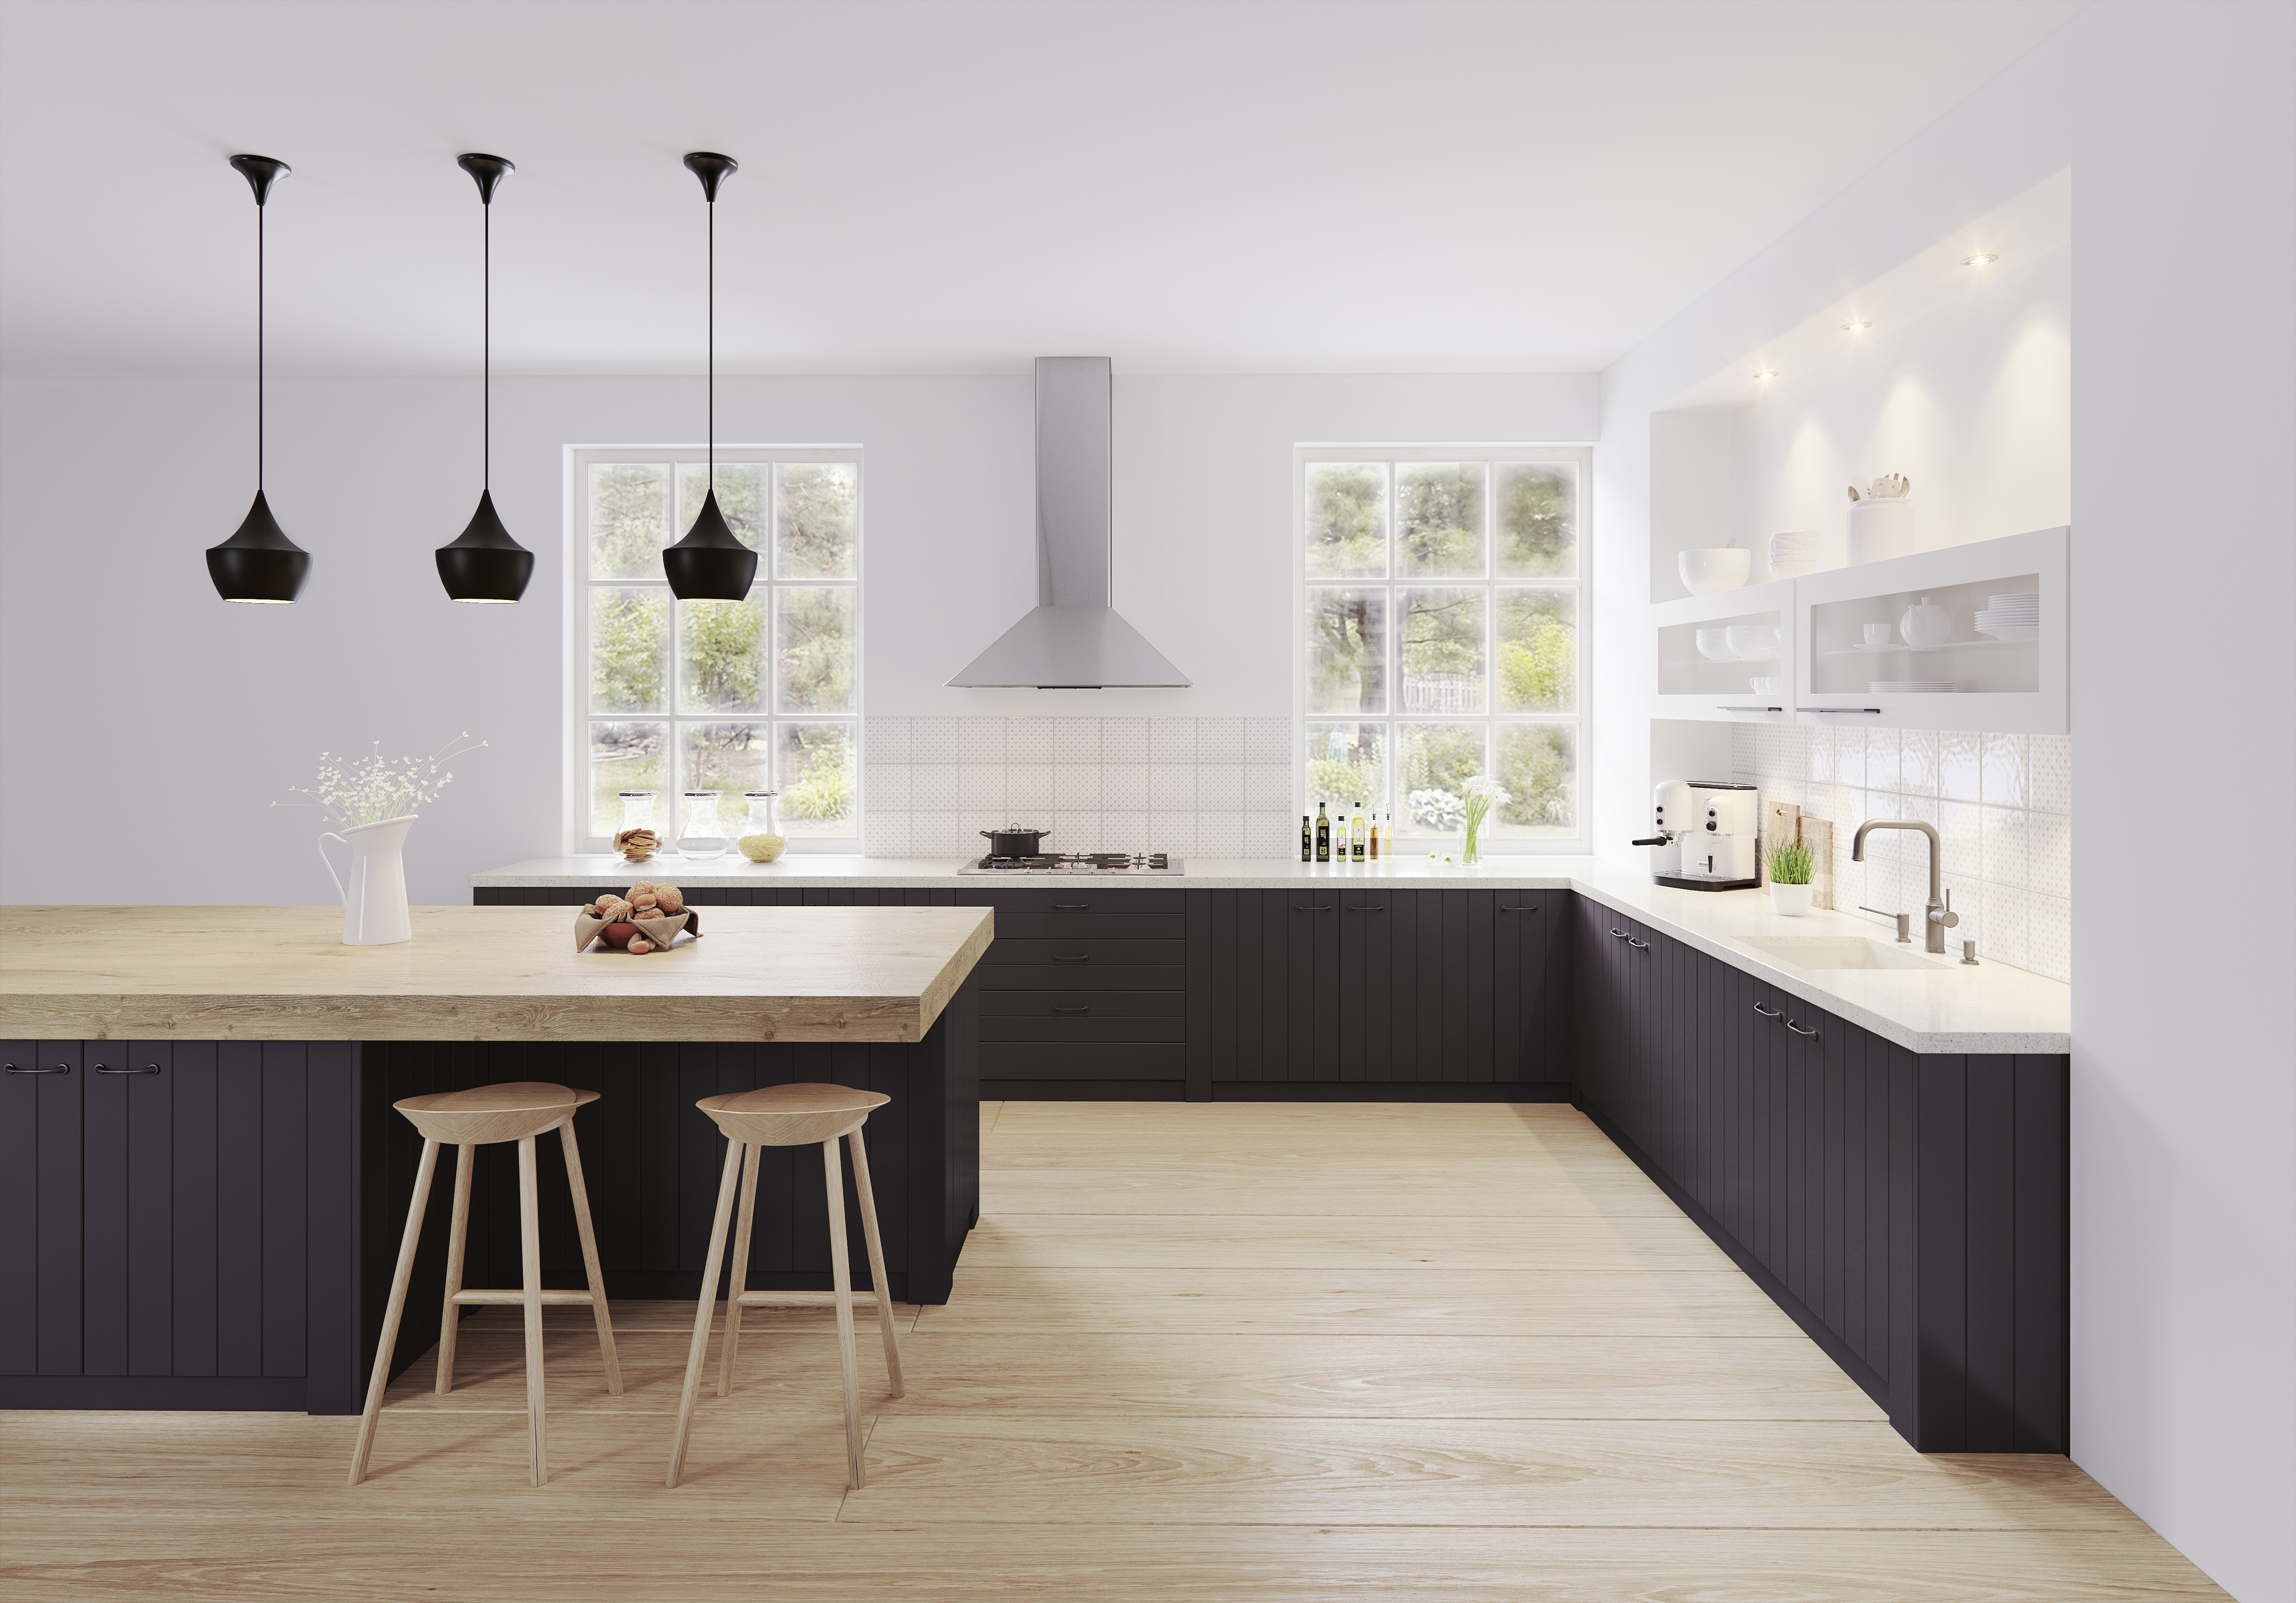 View into a kitchen with black base units